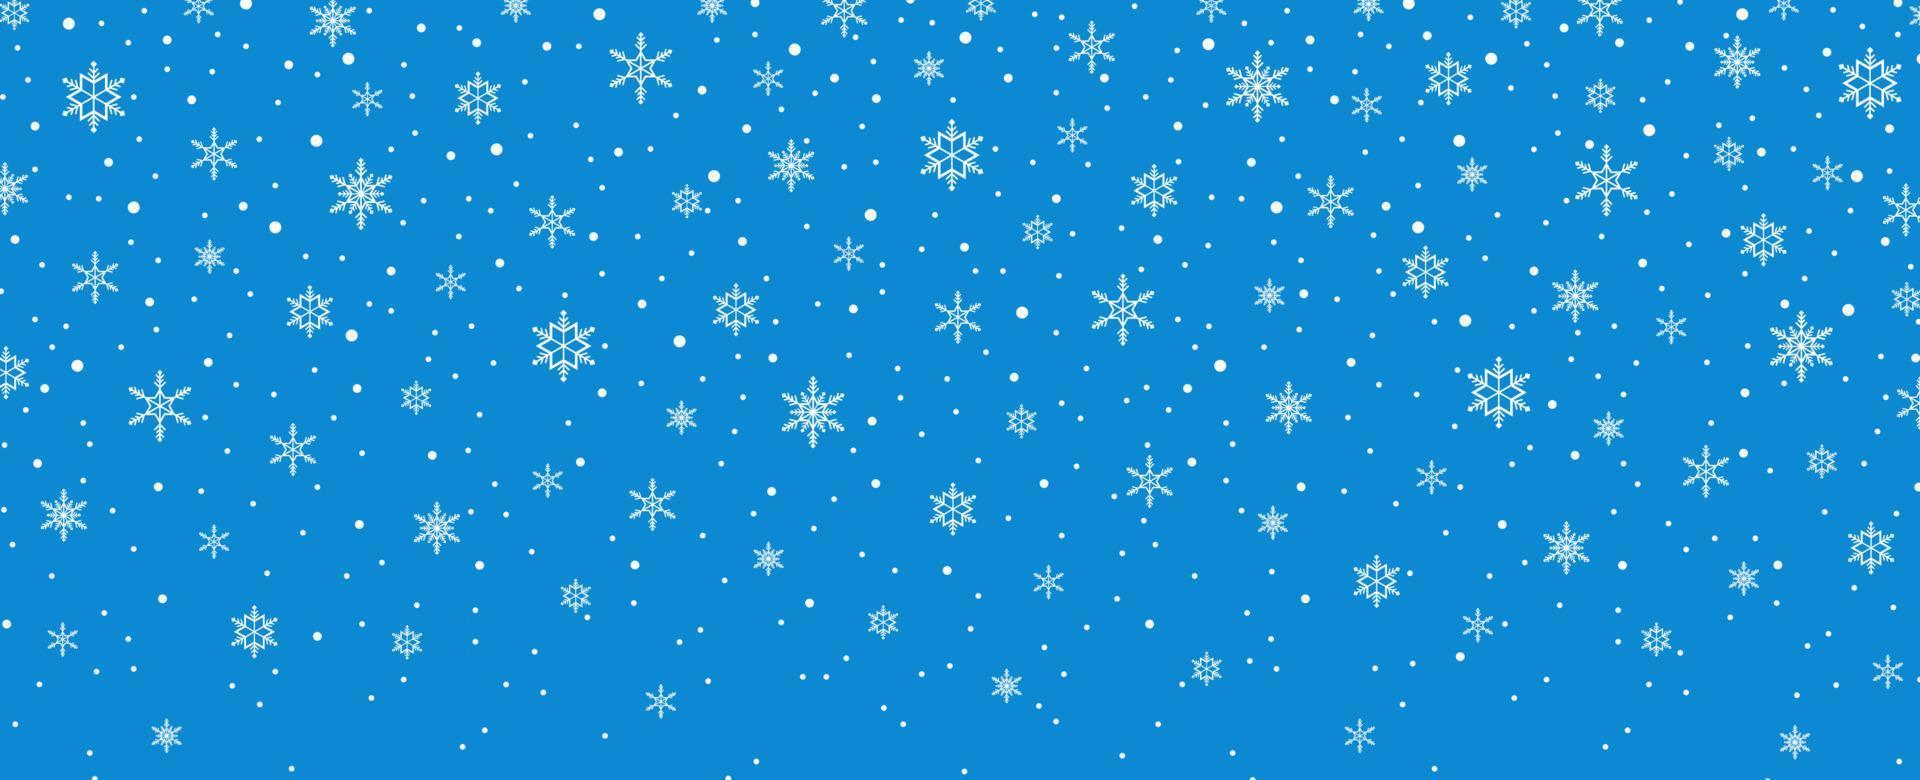 Merry Christmas, snowflakes and snowfall background vector